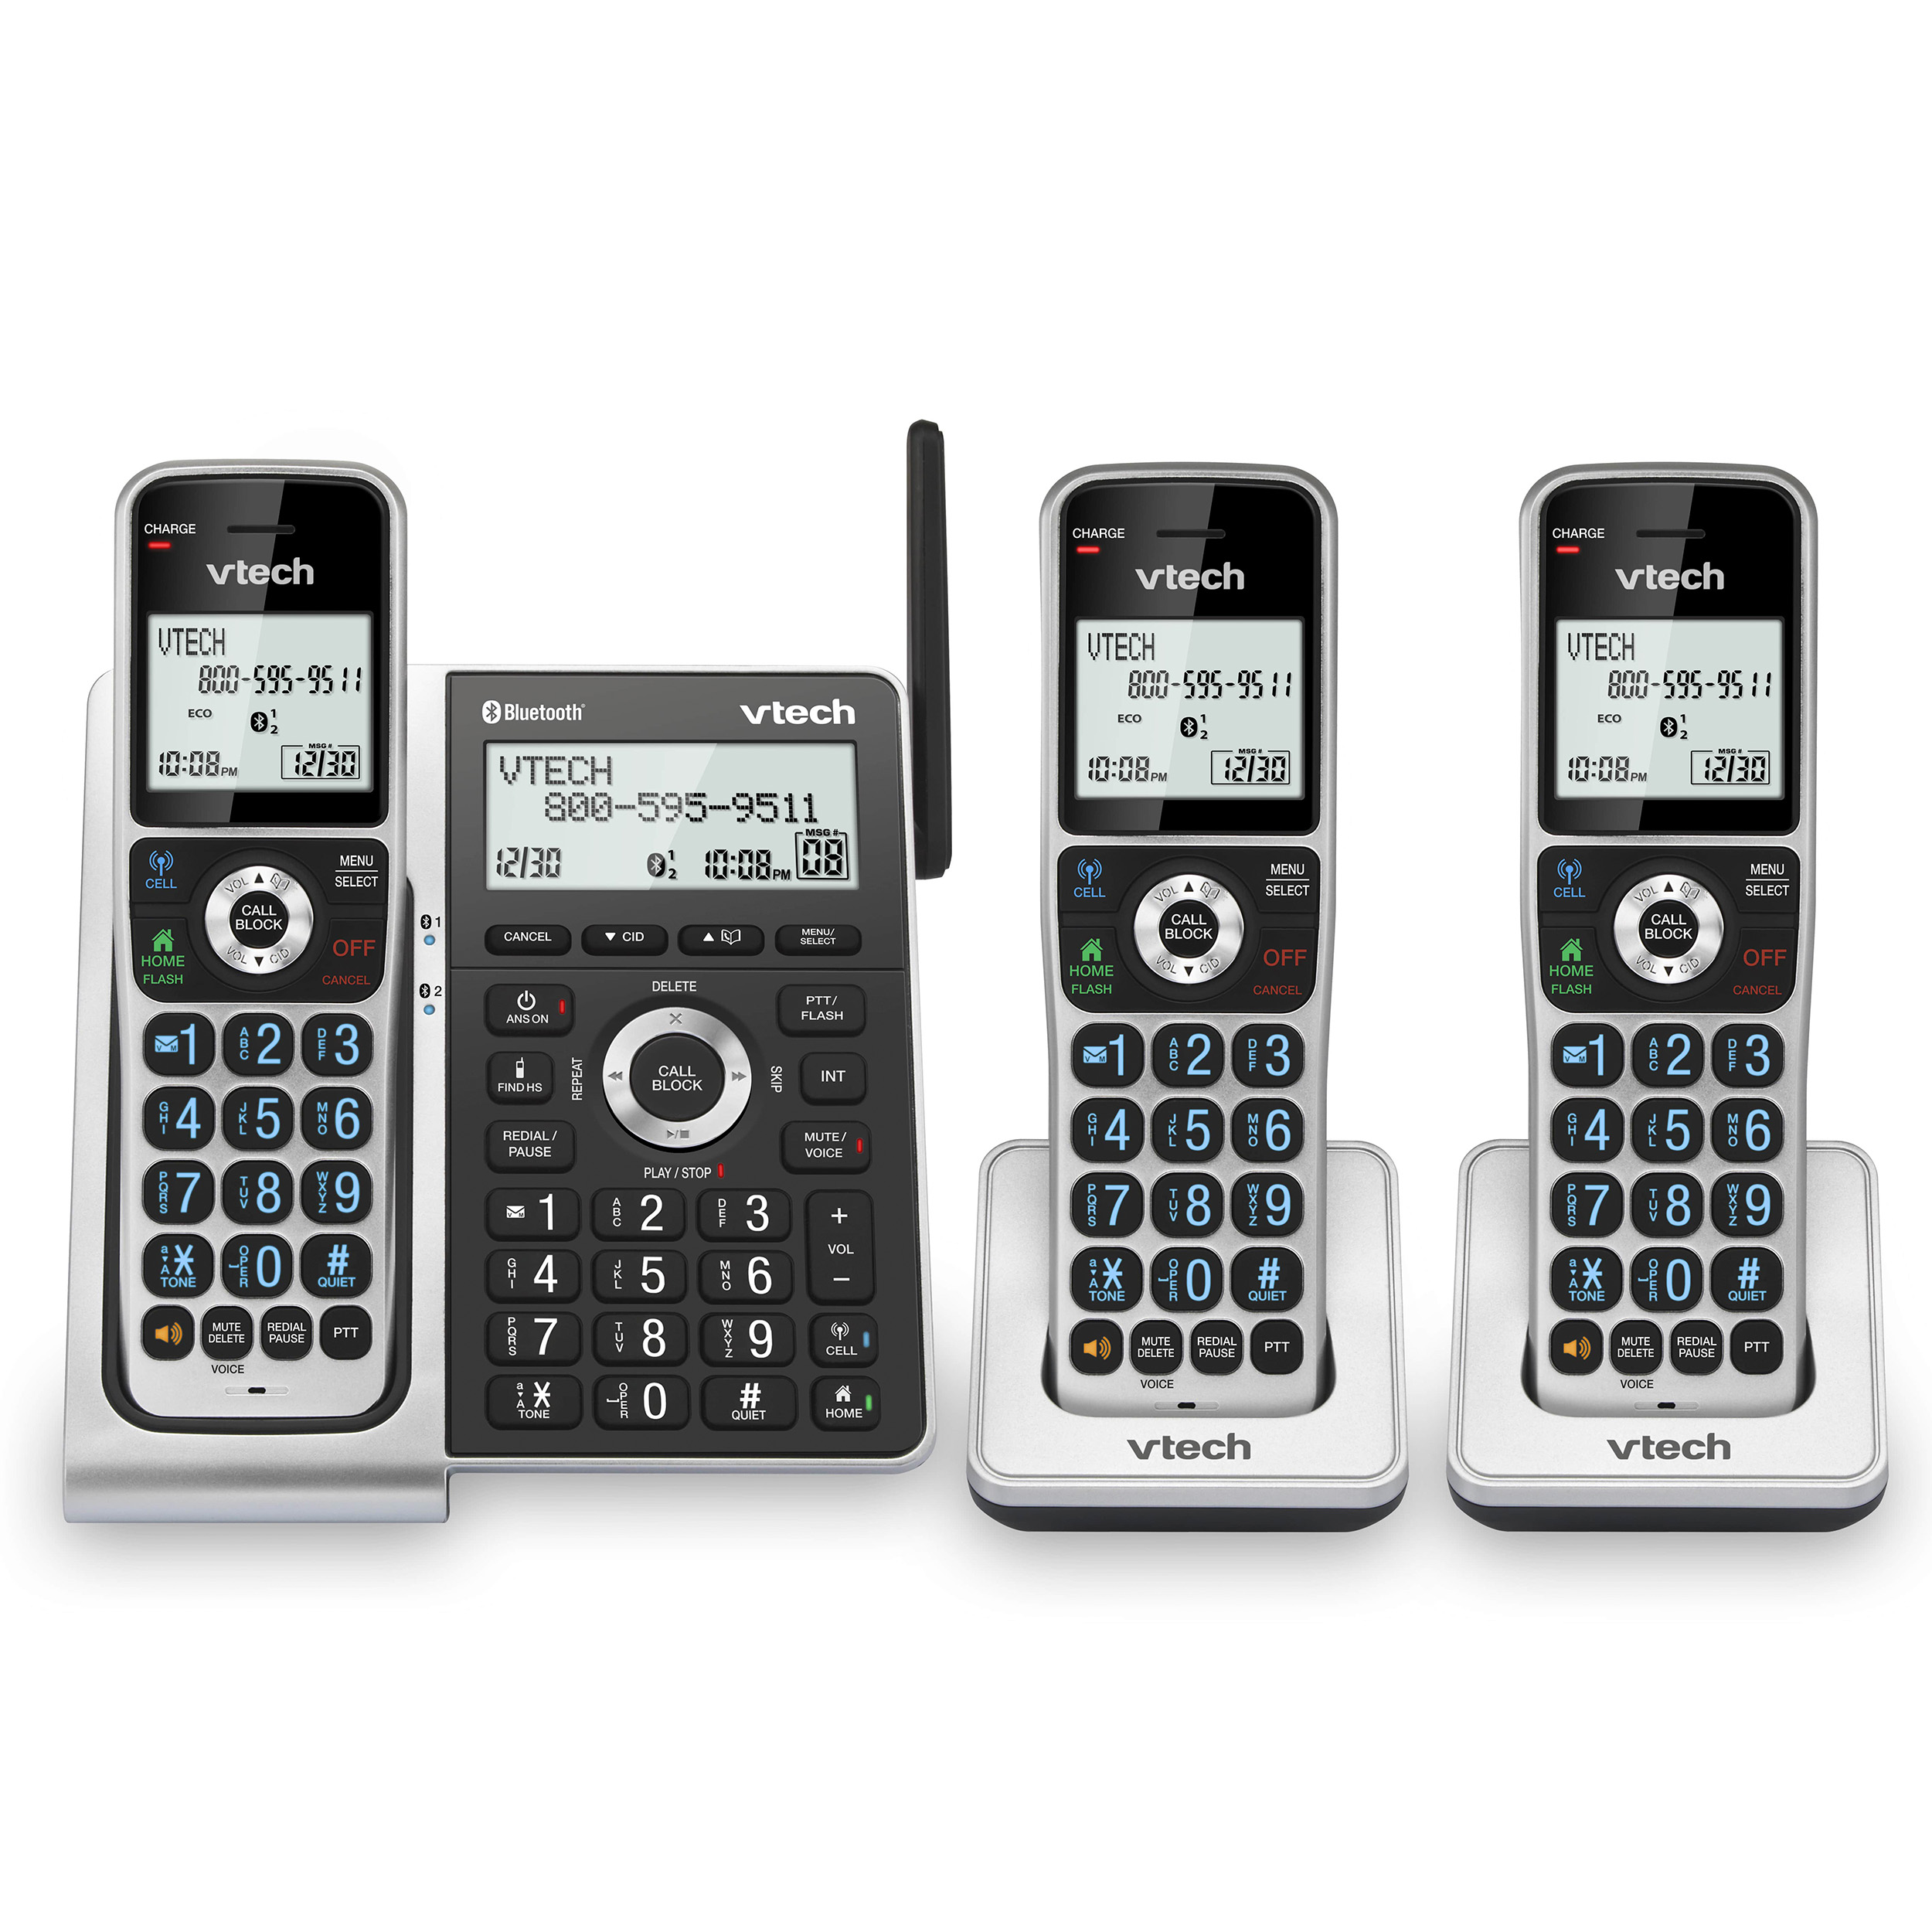 3-Handset Extended Range Expandable Cordless Phone with Bluetooth Connect to Cell, Smart Call Blocker and Answering System - view 1